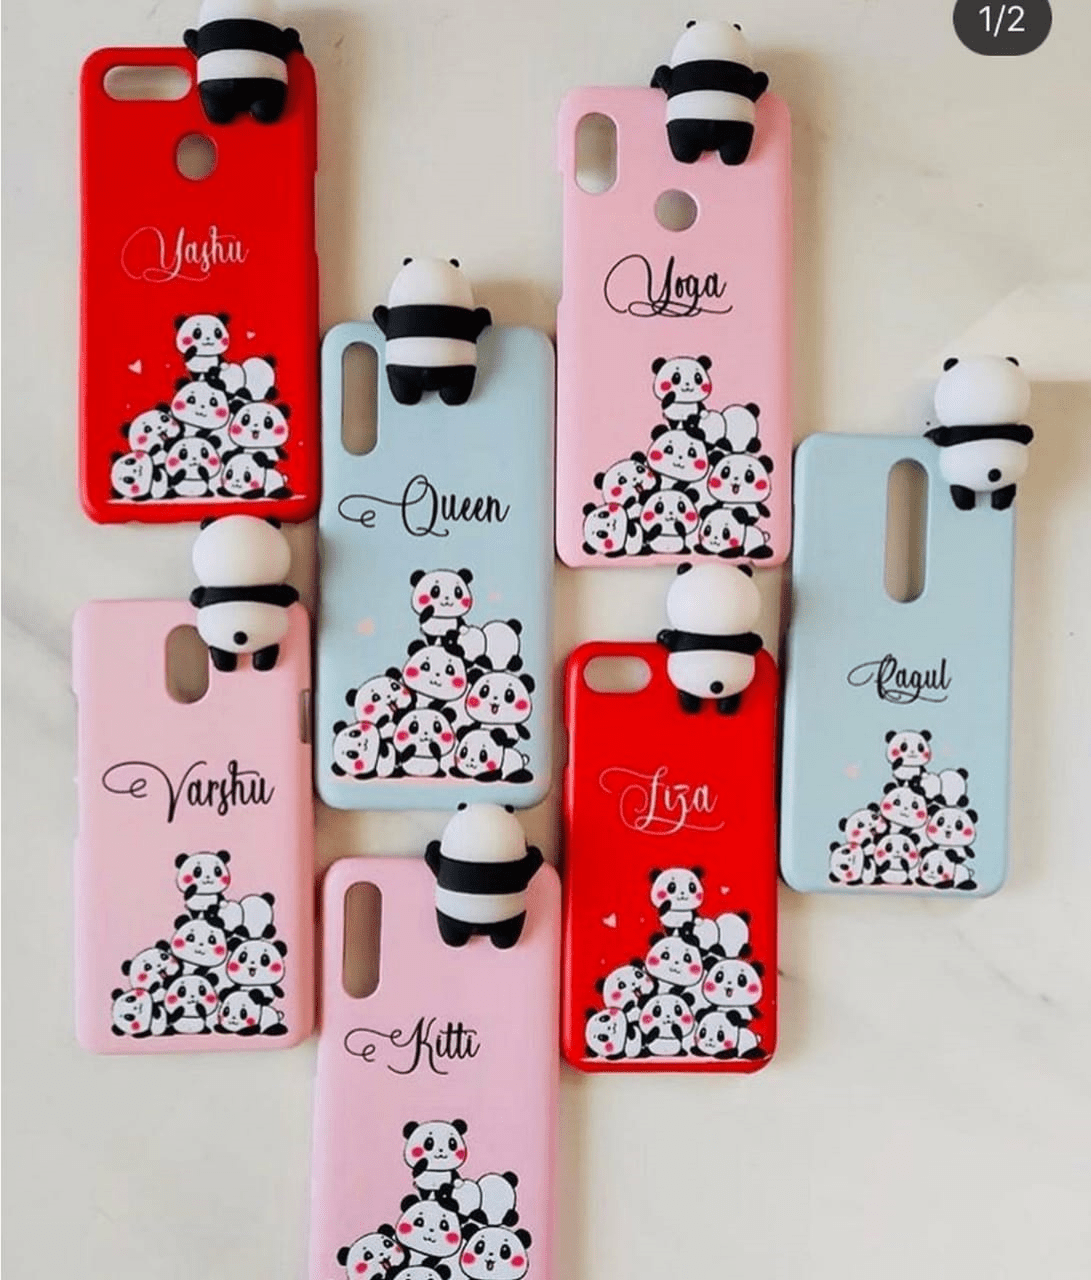 Name Cases with cute pandas